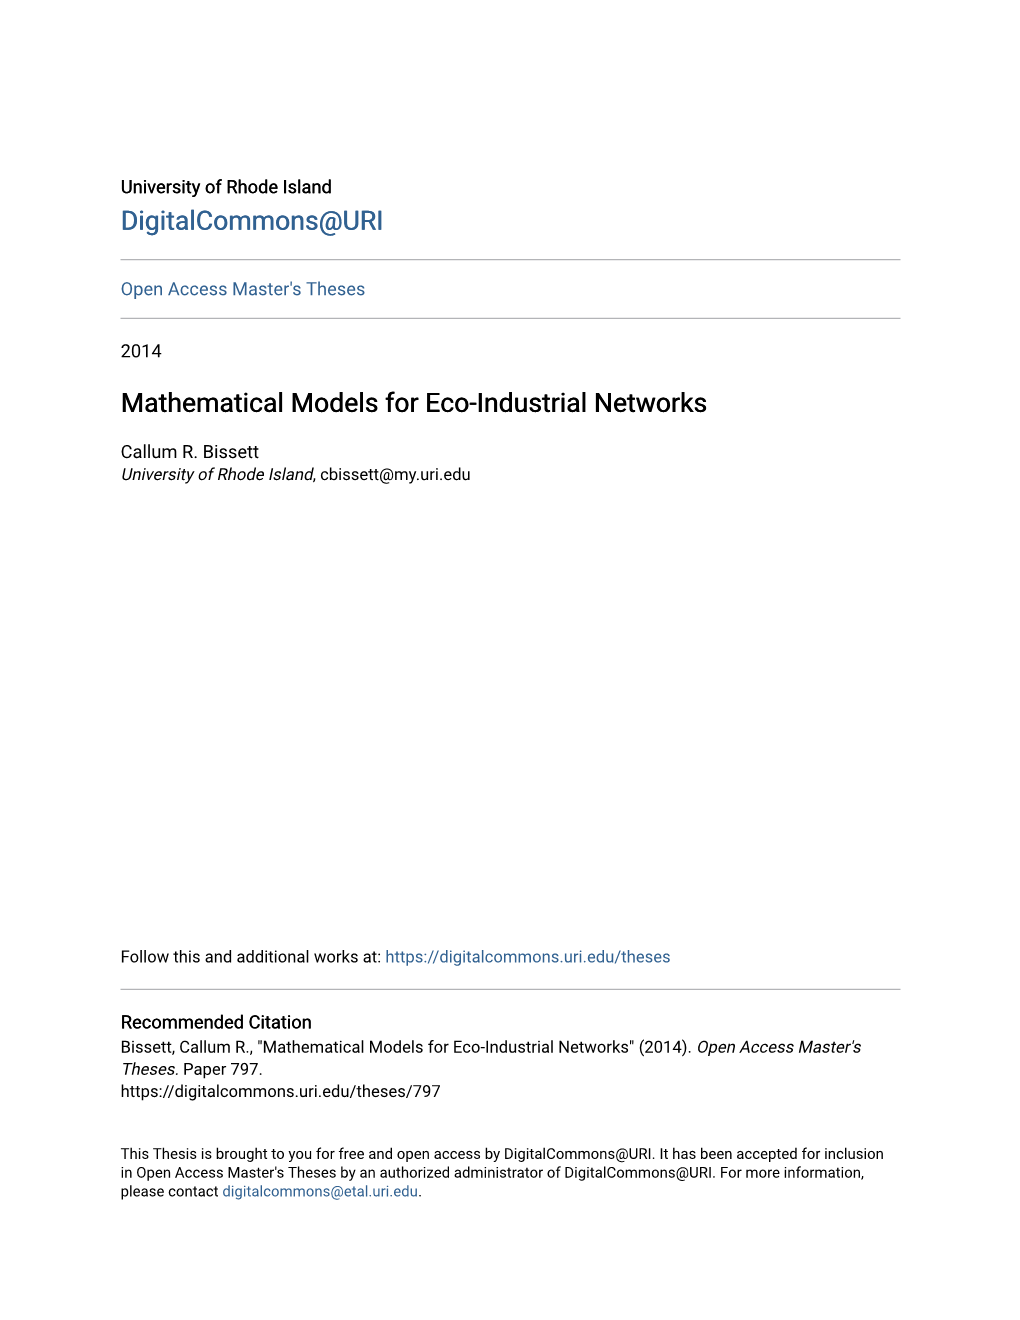 Mathematical Models for Eco-Industrial Networks